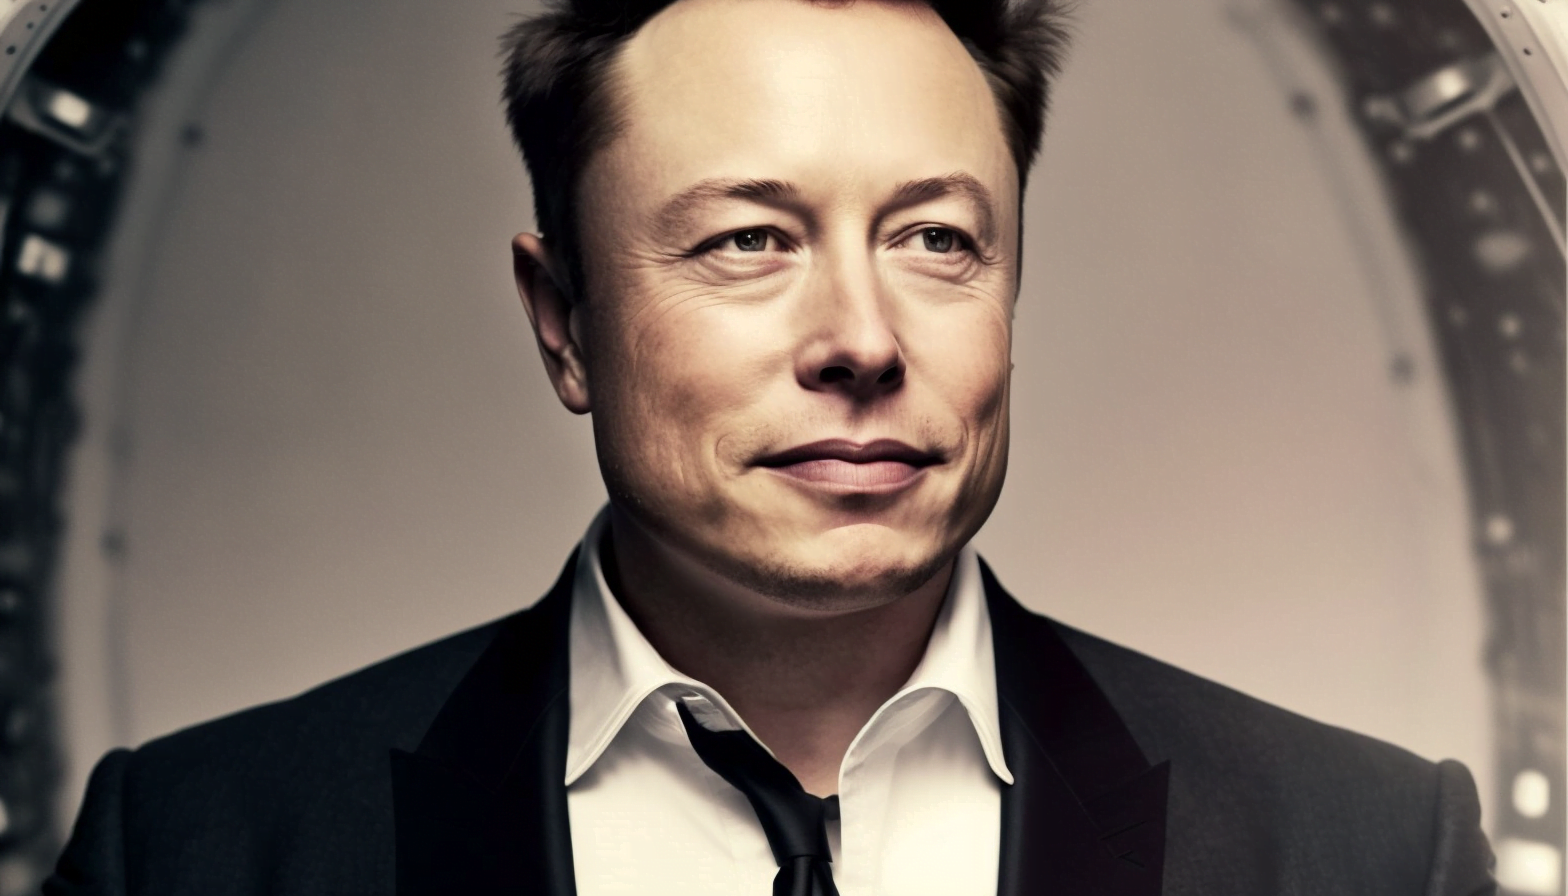 Elon Musk reportedly wants to develop his own ChatGPT